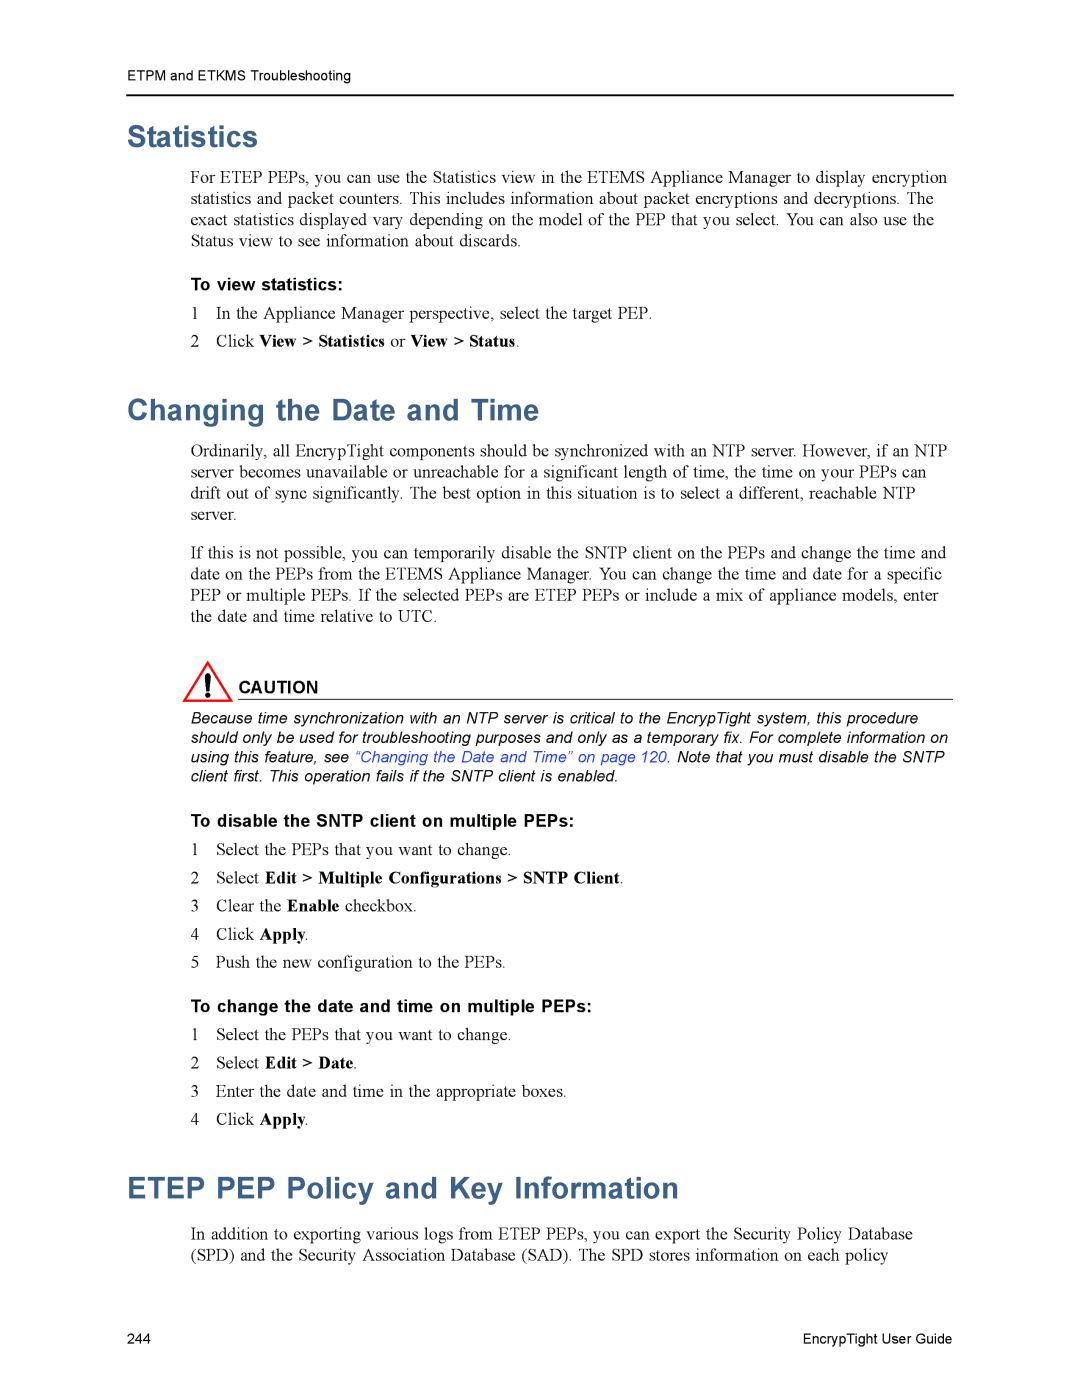 Black Box ET0100A, ET1000A, ET0010A, EncrypTight manual Statistics, Etep PEP Policy and Key Information, To view statistics 